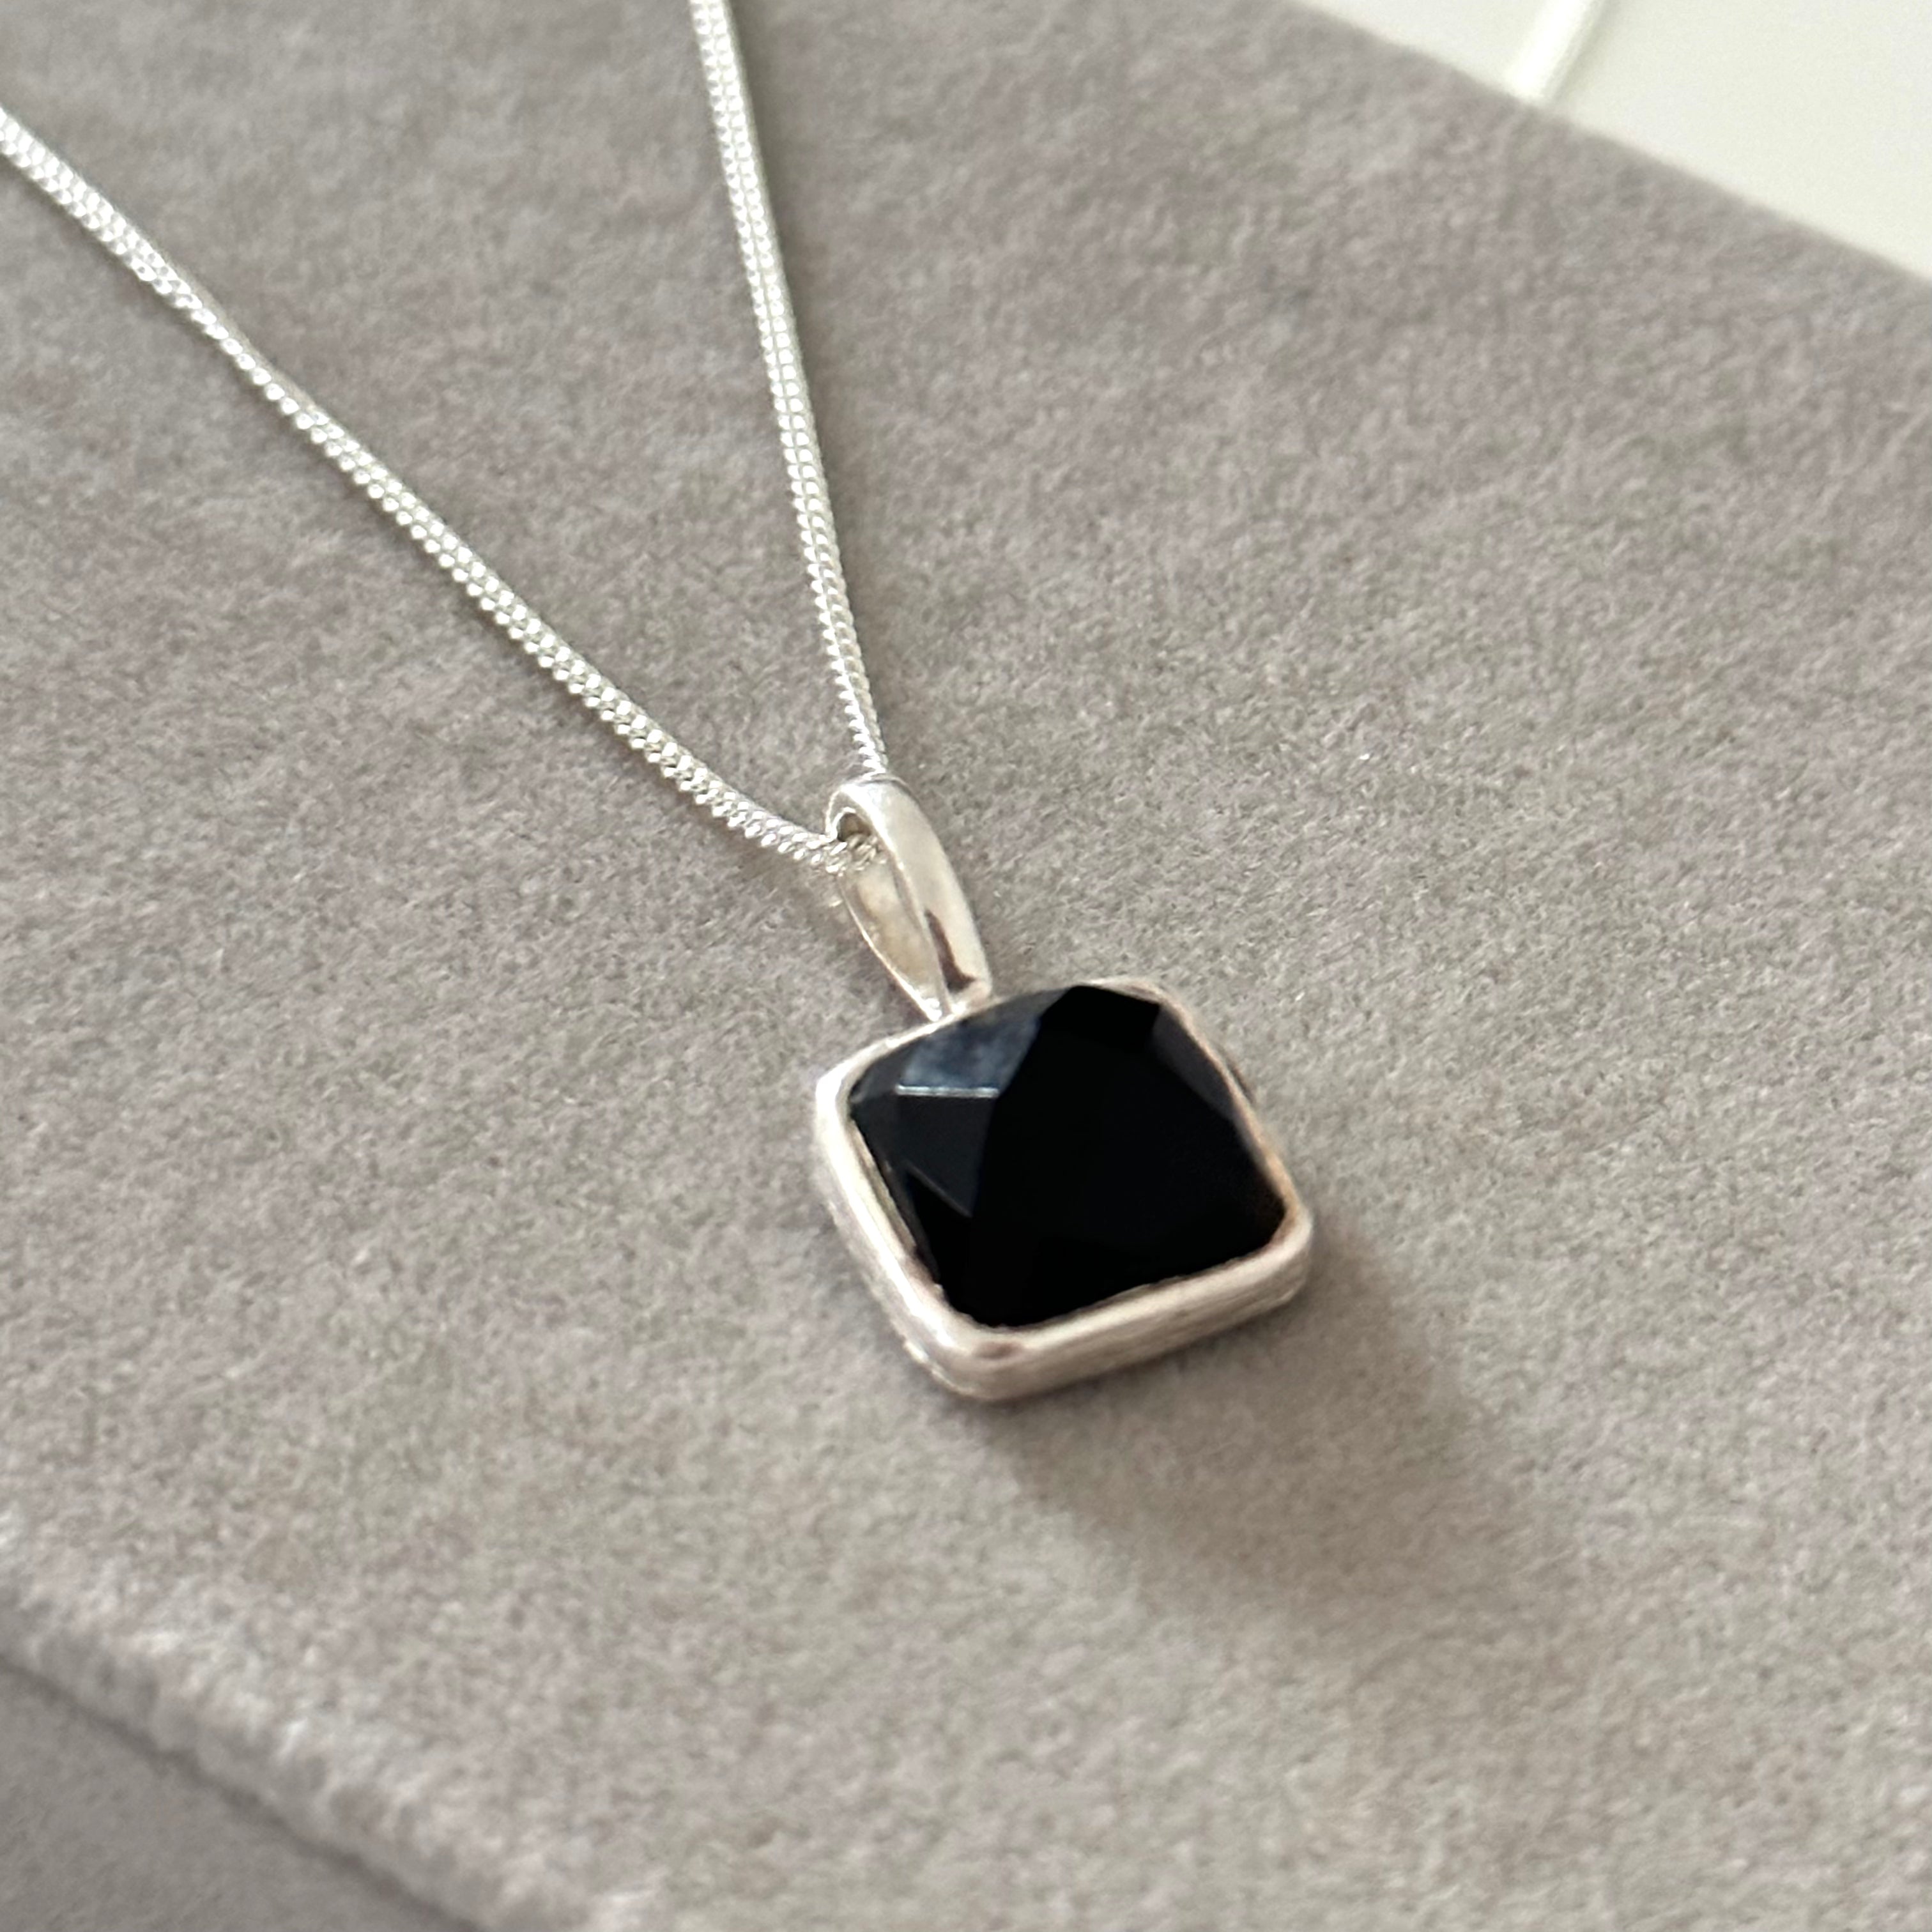 Sterling Silver Pendant Necklace with a Faceted Square Gemstone - Black Onyx